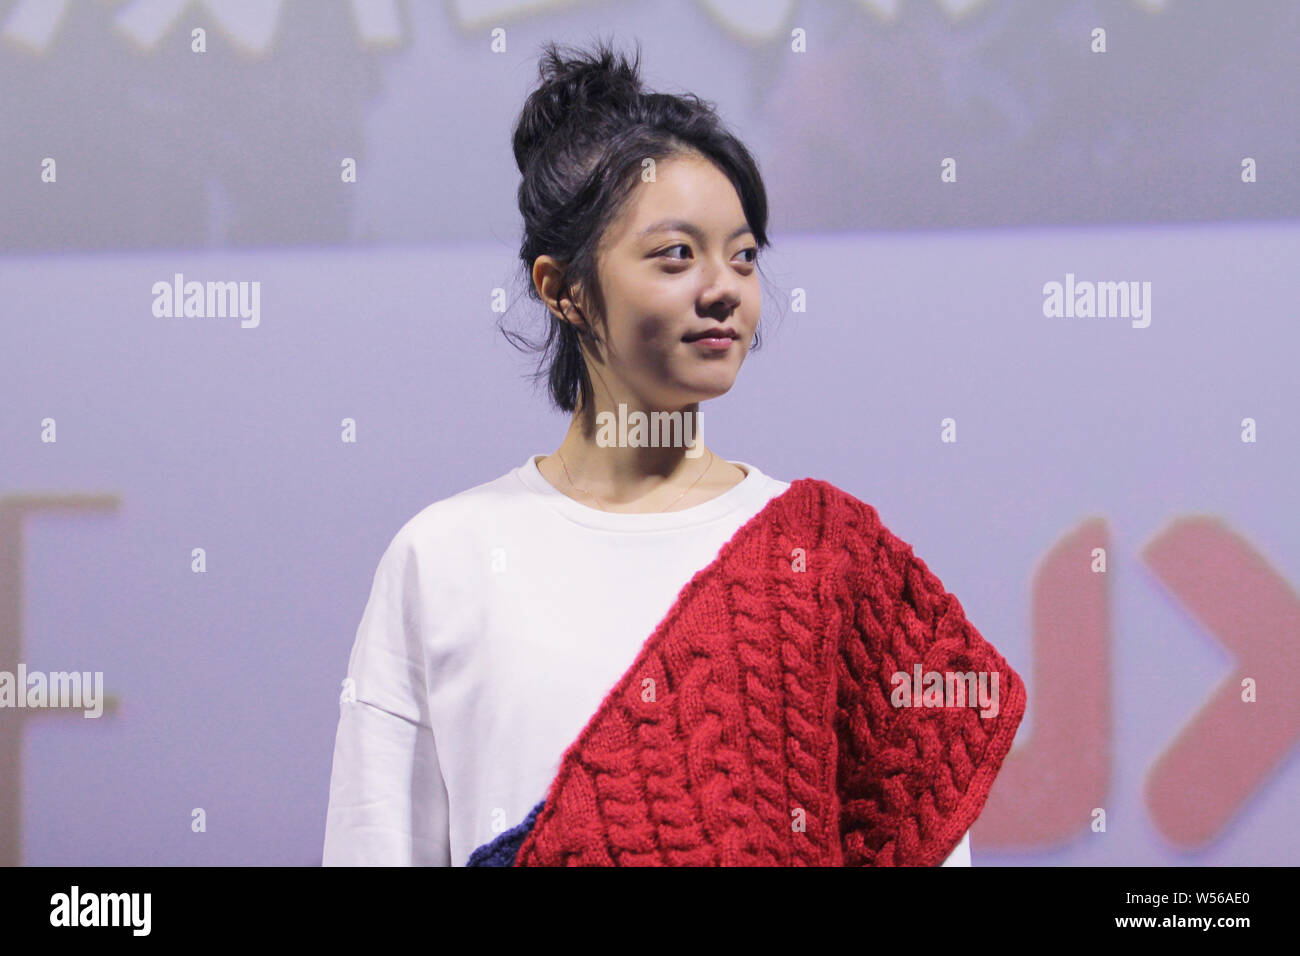 Chinese actress Angel Zhao Jinmai attends a promotional event for the Chinese science fiction film 'The Wandering Earth' in Wuhan city, central China' Stock Photo